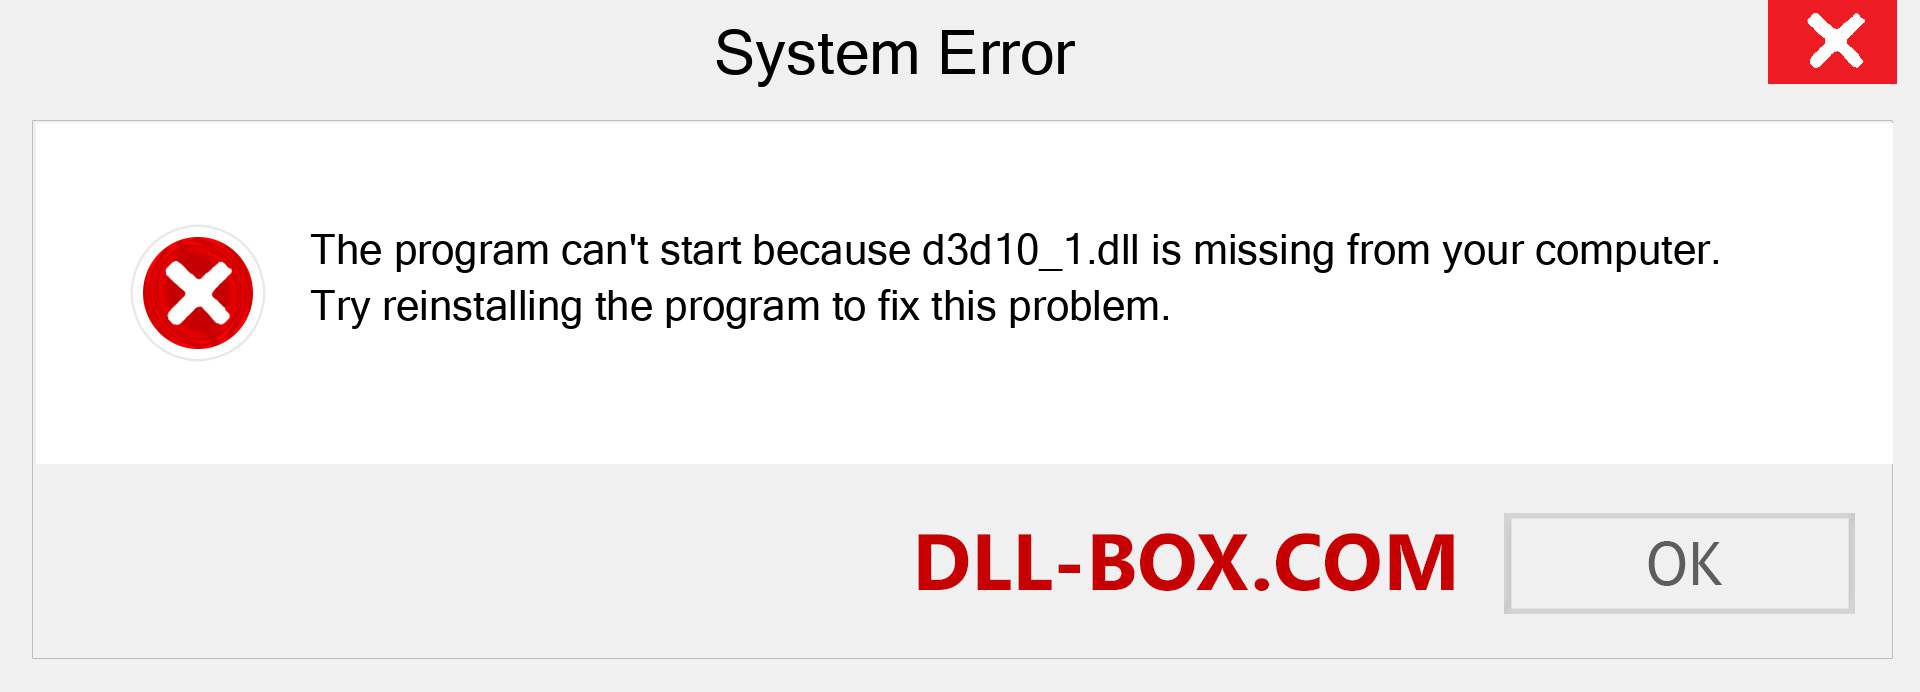  d3d10_1.dll file is missing?. Download for Windows 7, 8, 10 - Fix  d3d10_1 dll Missing Error on Windows, photos, images